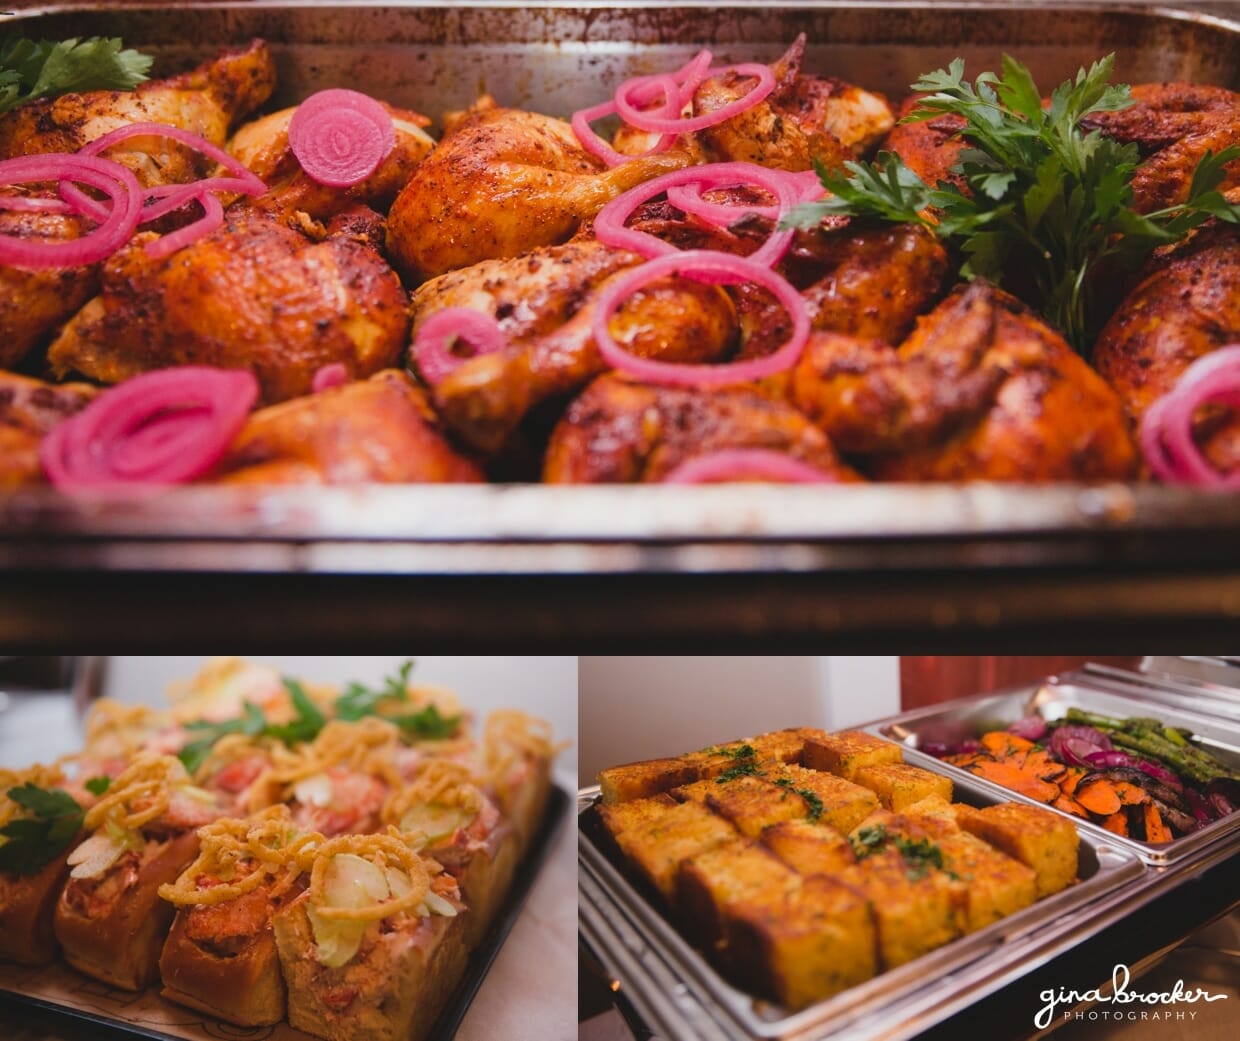 Rustic BBQ style food being served during a wedding rehearsal dinner at the Backyard BBQ restaurant in Nantucket, Massachusetts